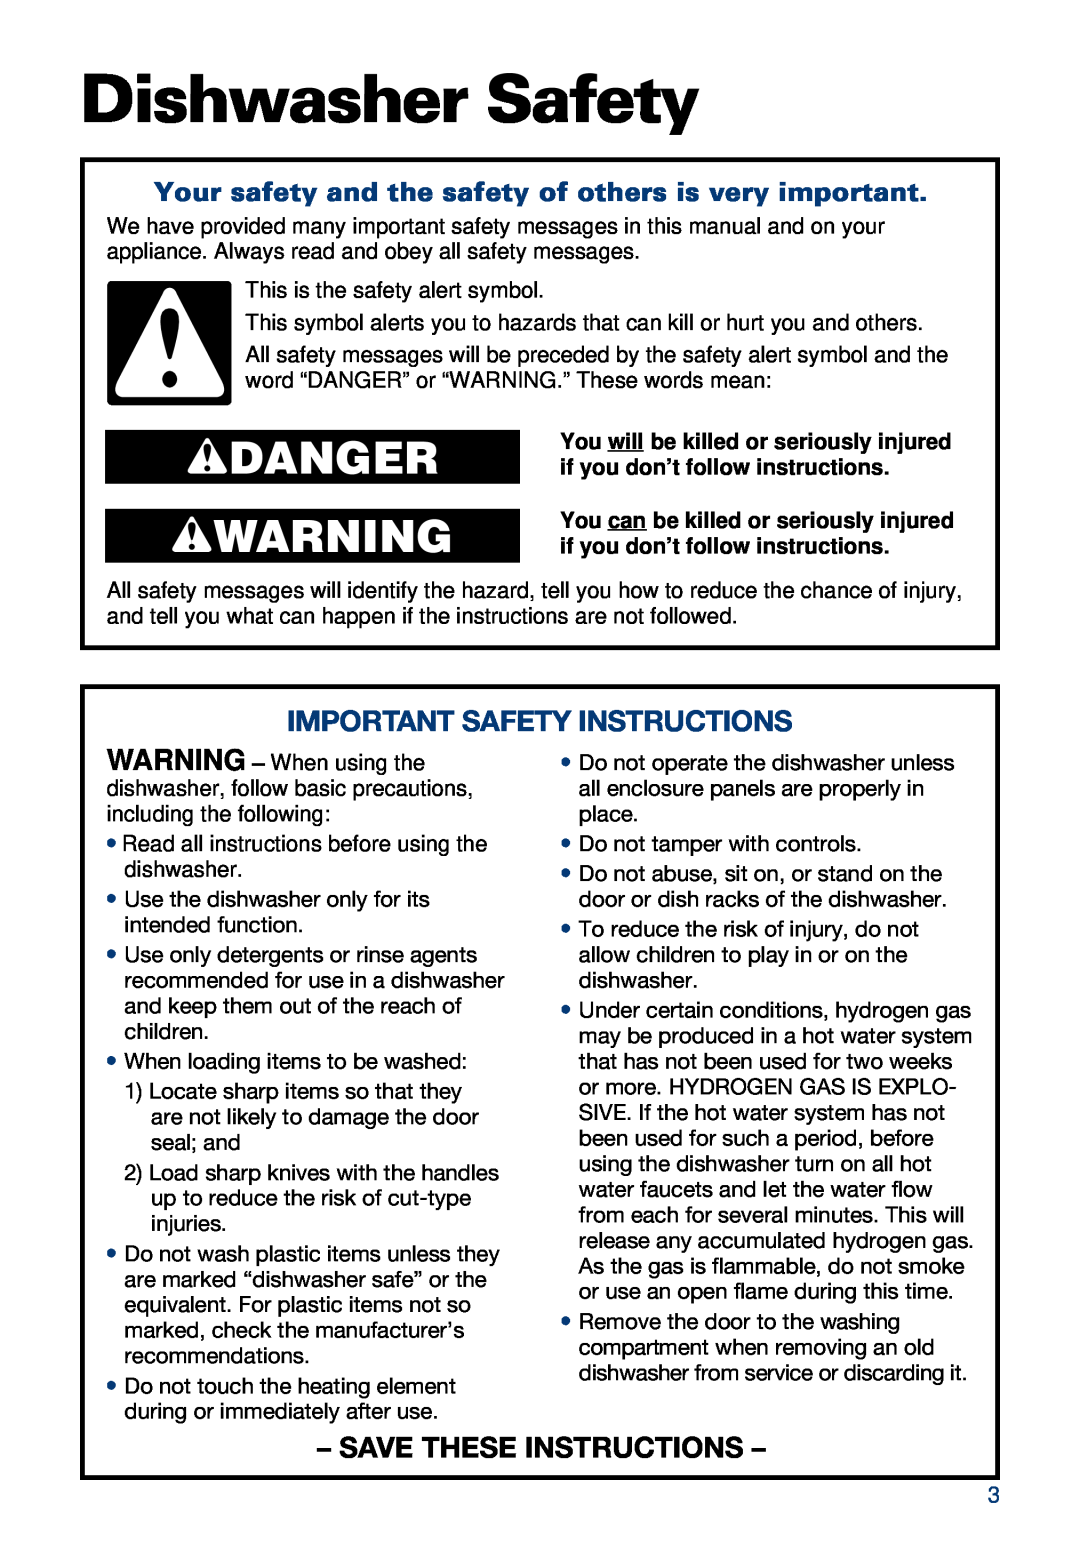 Whirlpool 900 warranty Dishwasher Safety, wDANGER wWARNING, Save These Instructions, Important Safety Instructions 